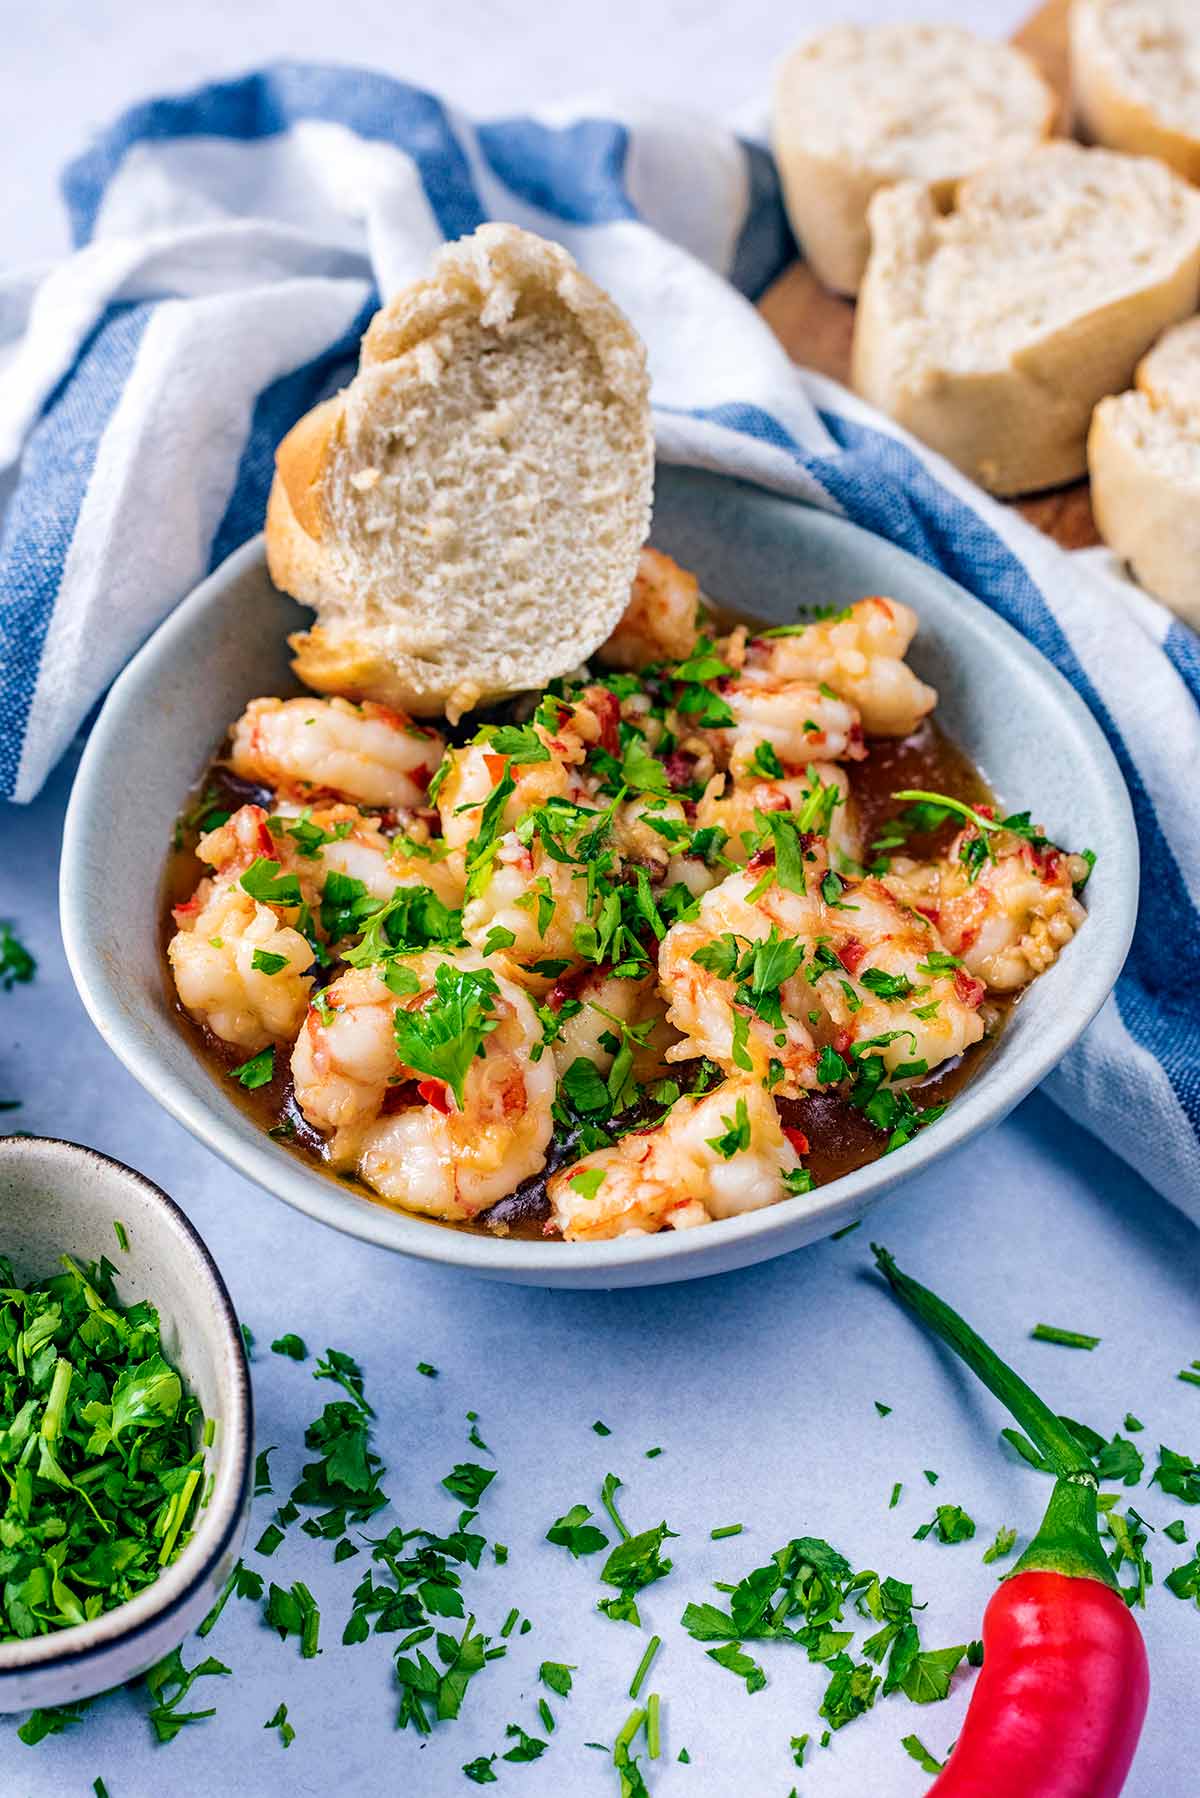 Cooked prawns and a piece of bread in a bowl next to more bread.